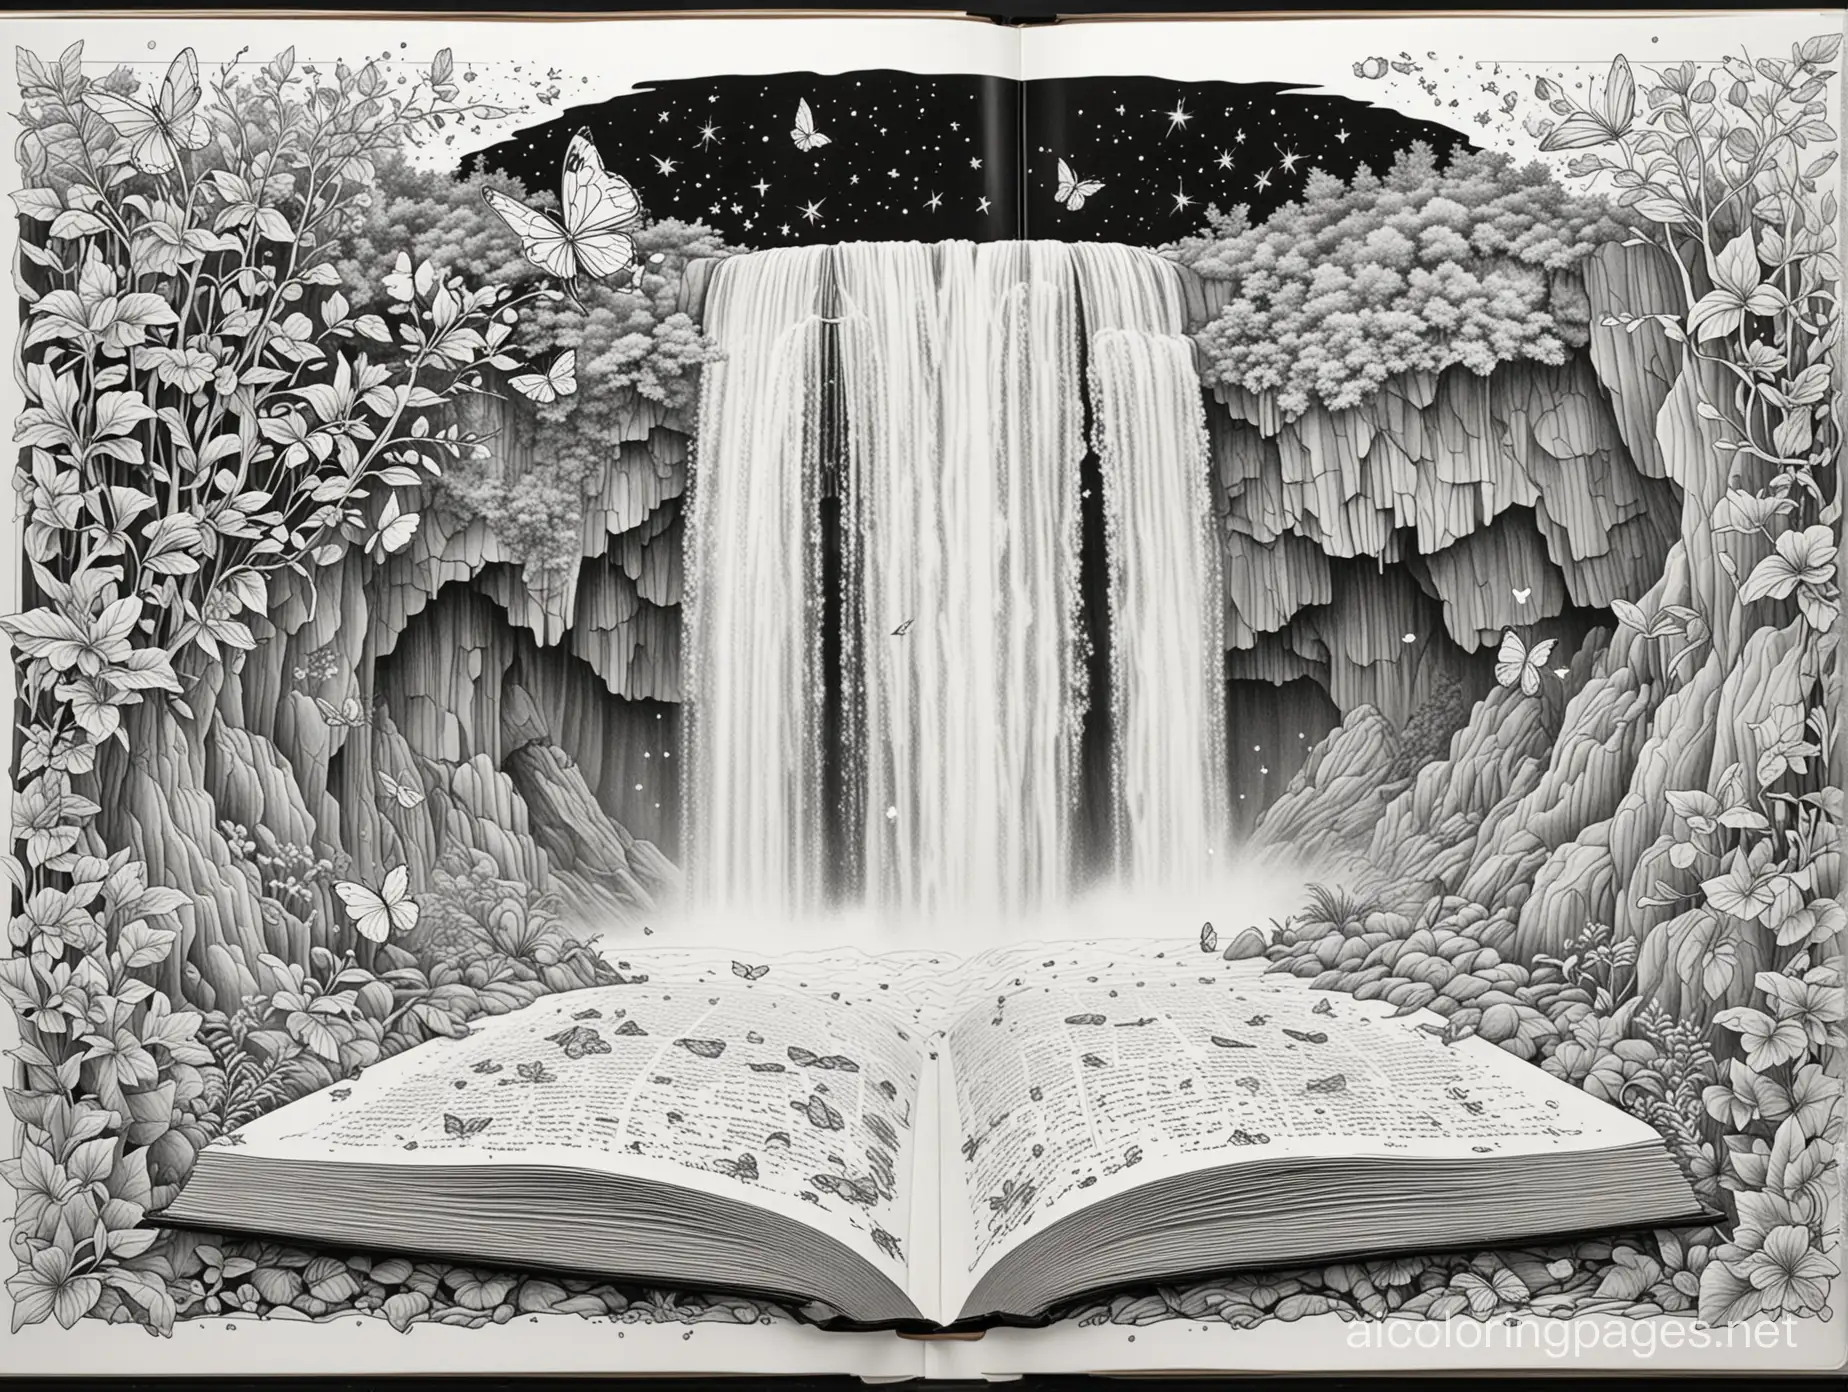 Waterfall-Rising-from-an-Open-Book-with-Stars-and-Butterflies